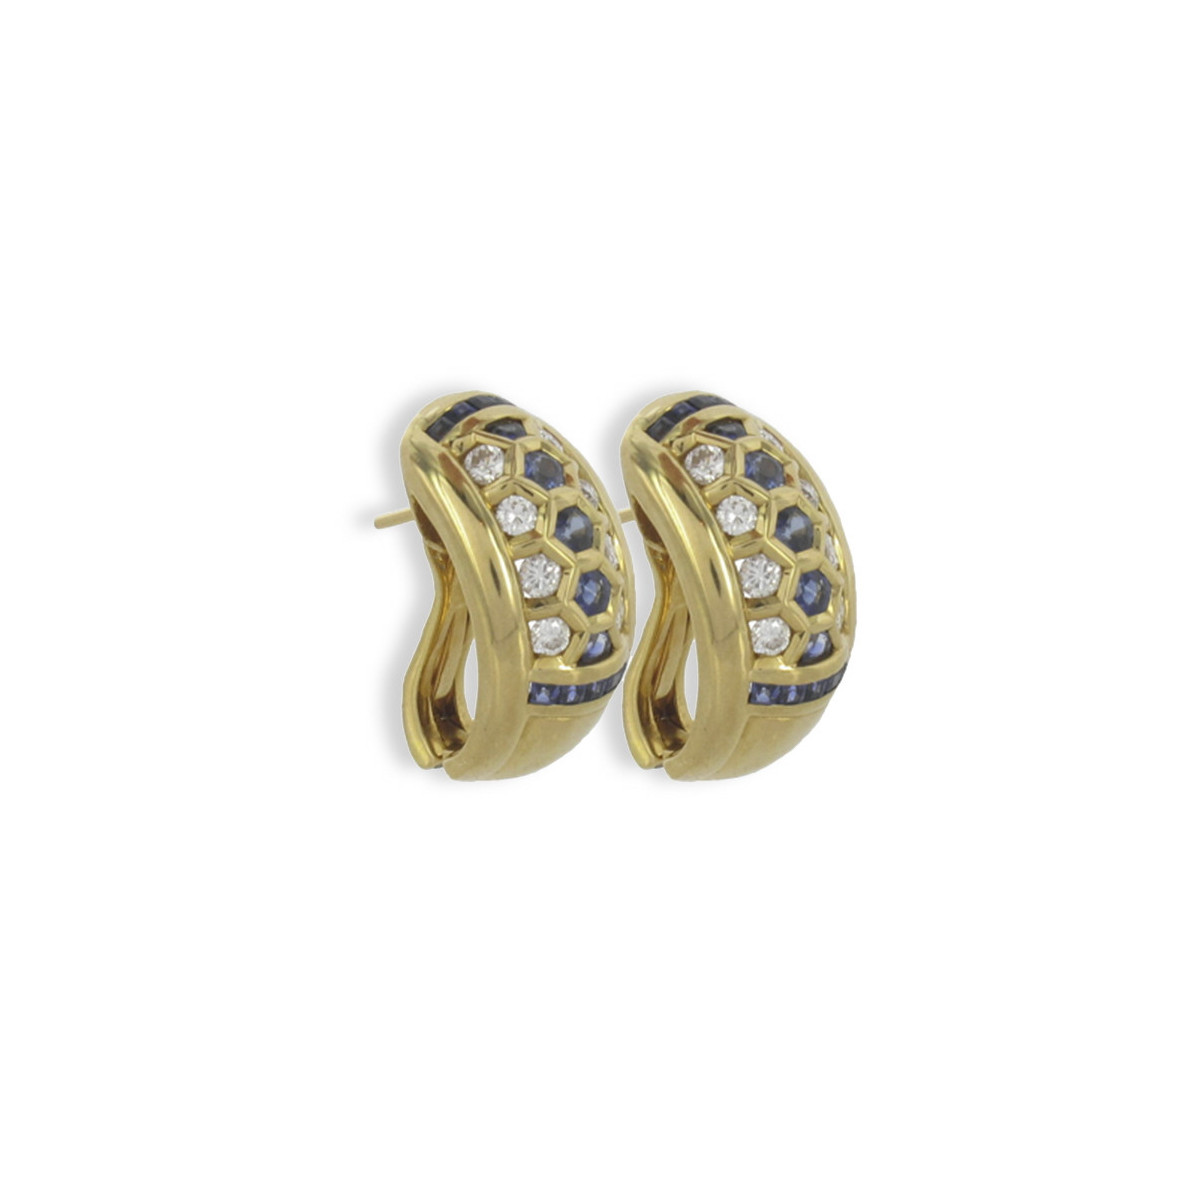 GOLD DIAMONDS AND SAPPHIRE EARRING